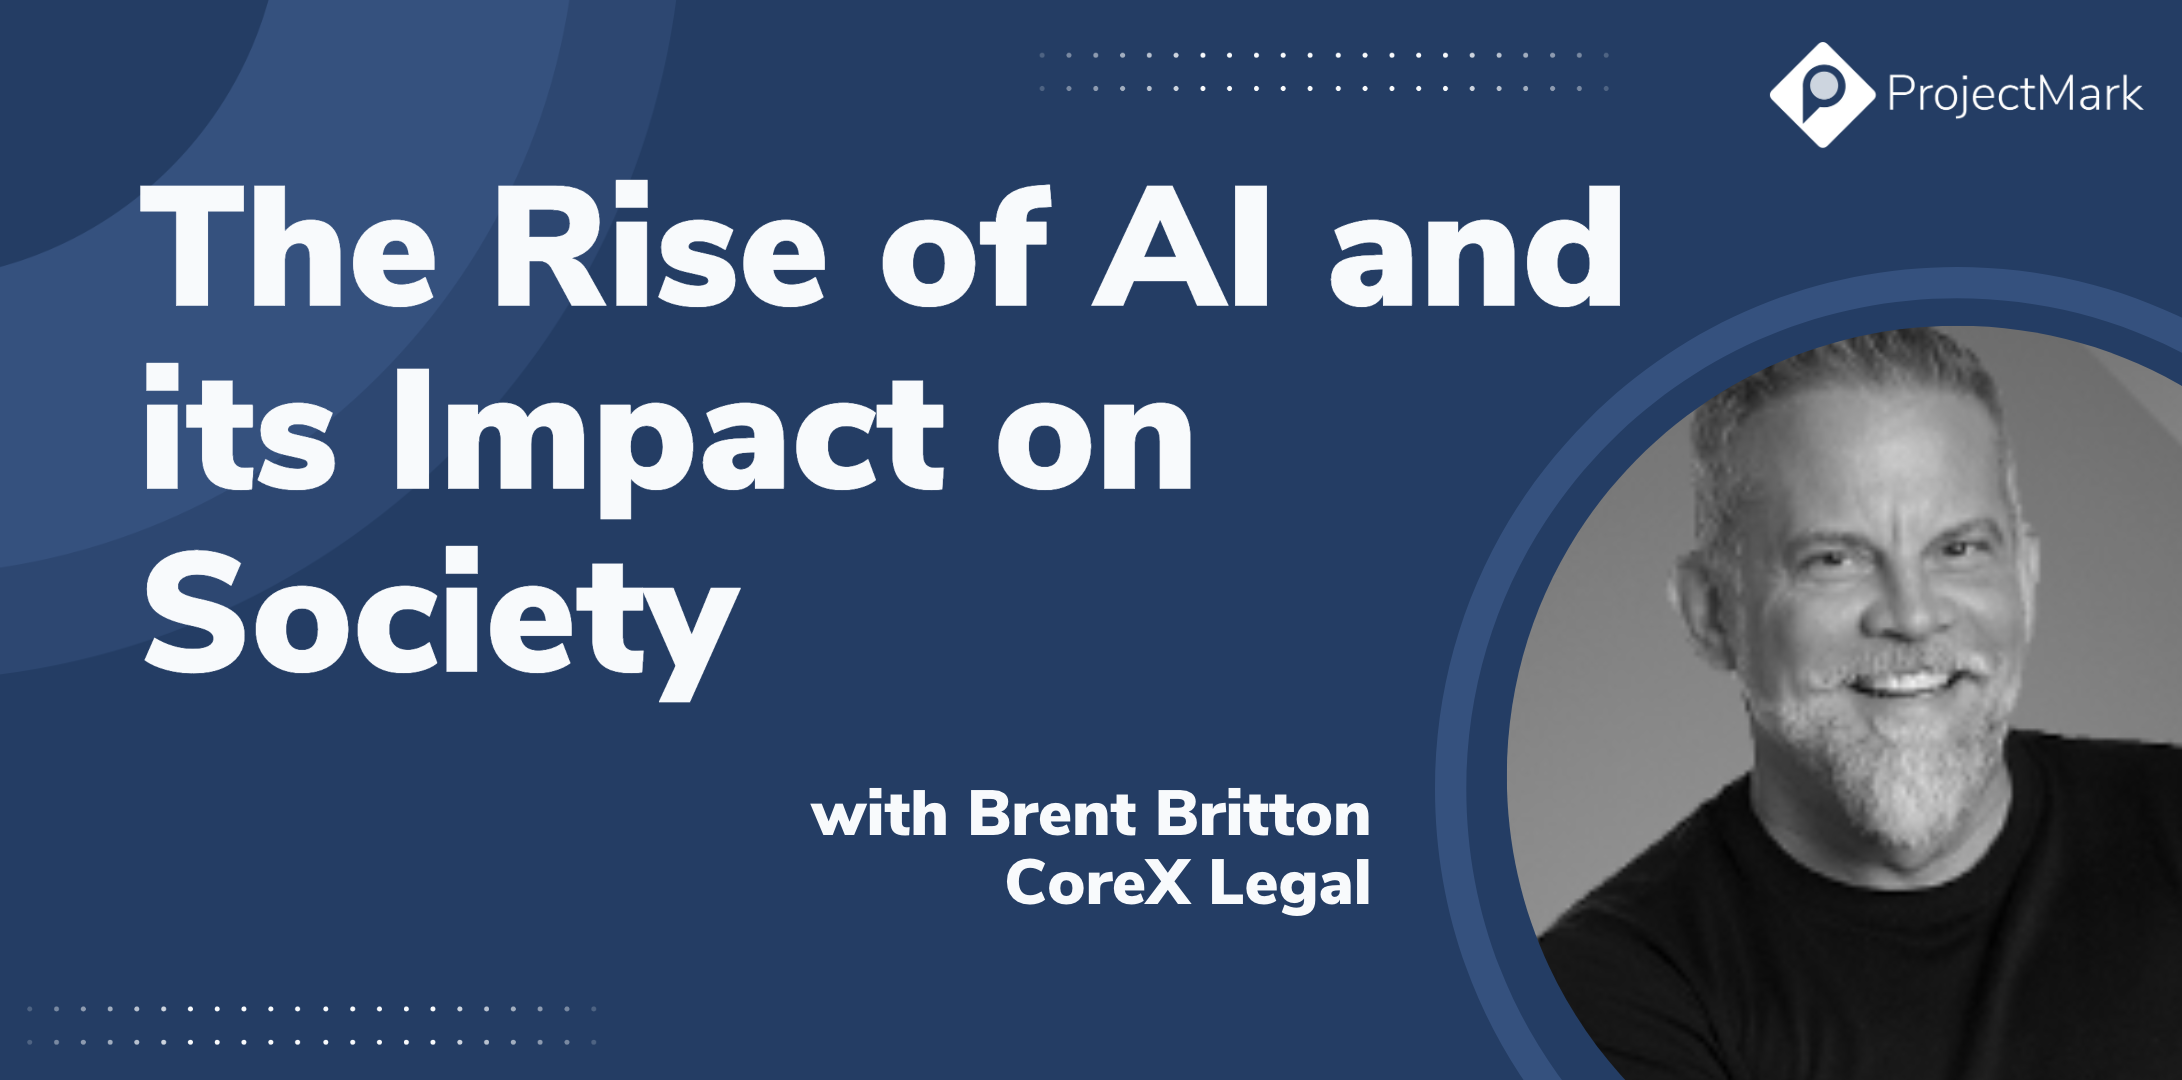 The Rise of AI and its Impact on Society with Brent Britton